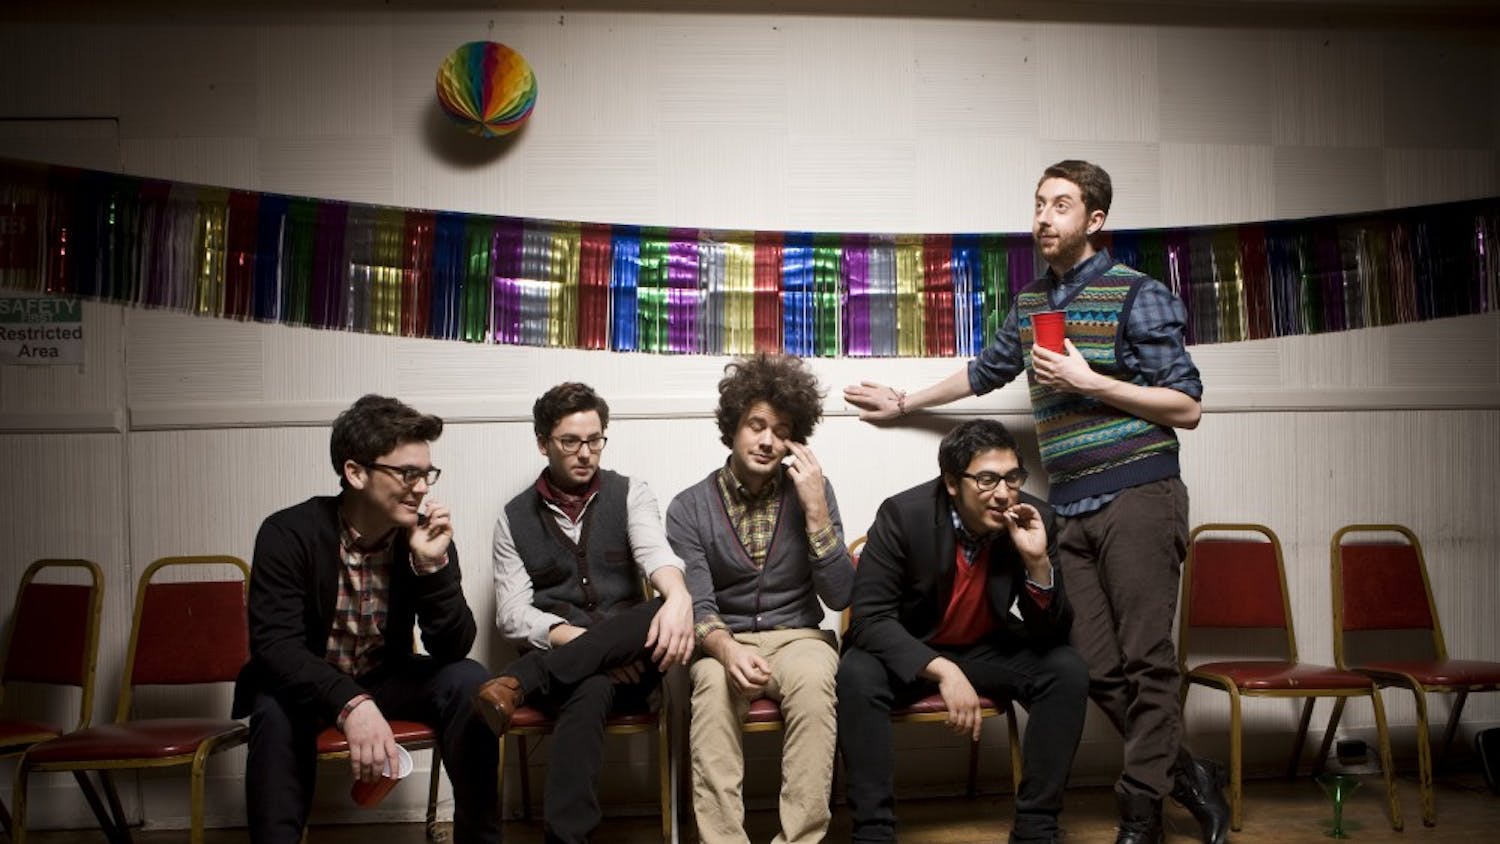 	Passion Pit will be performing in the newly renovated Carmichael Auditorium for the 2010 Homecoming Concert on October 29. The electro-pop band was formed in 2007 in Cambridge, Massachusetts. Courtesy of Passion Pit